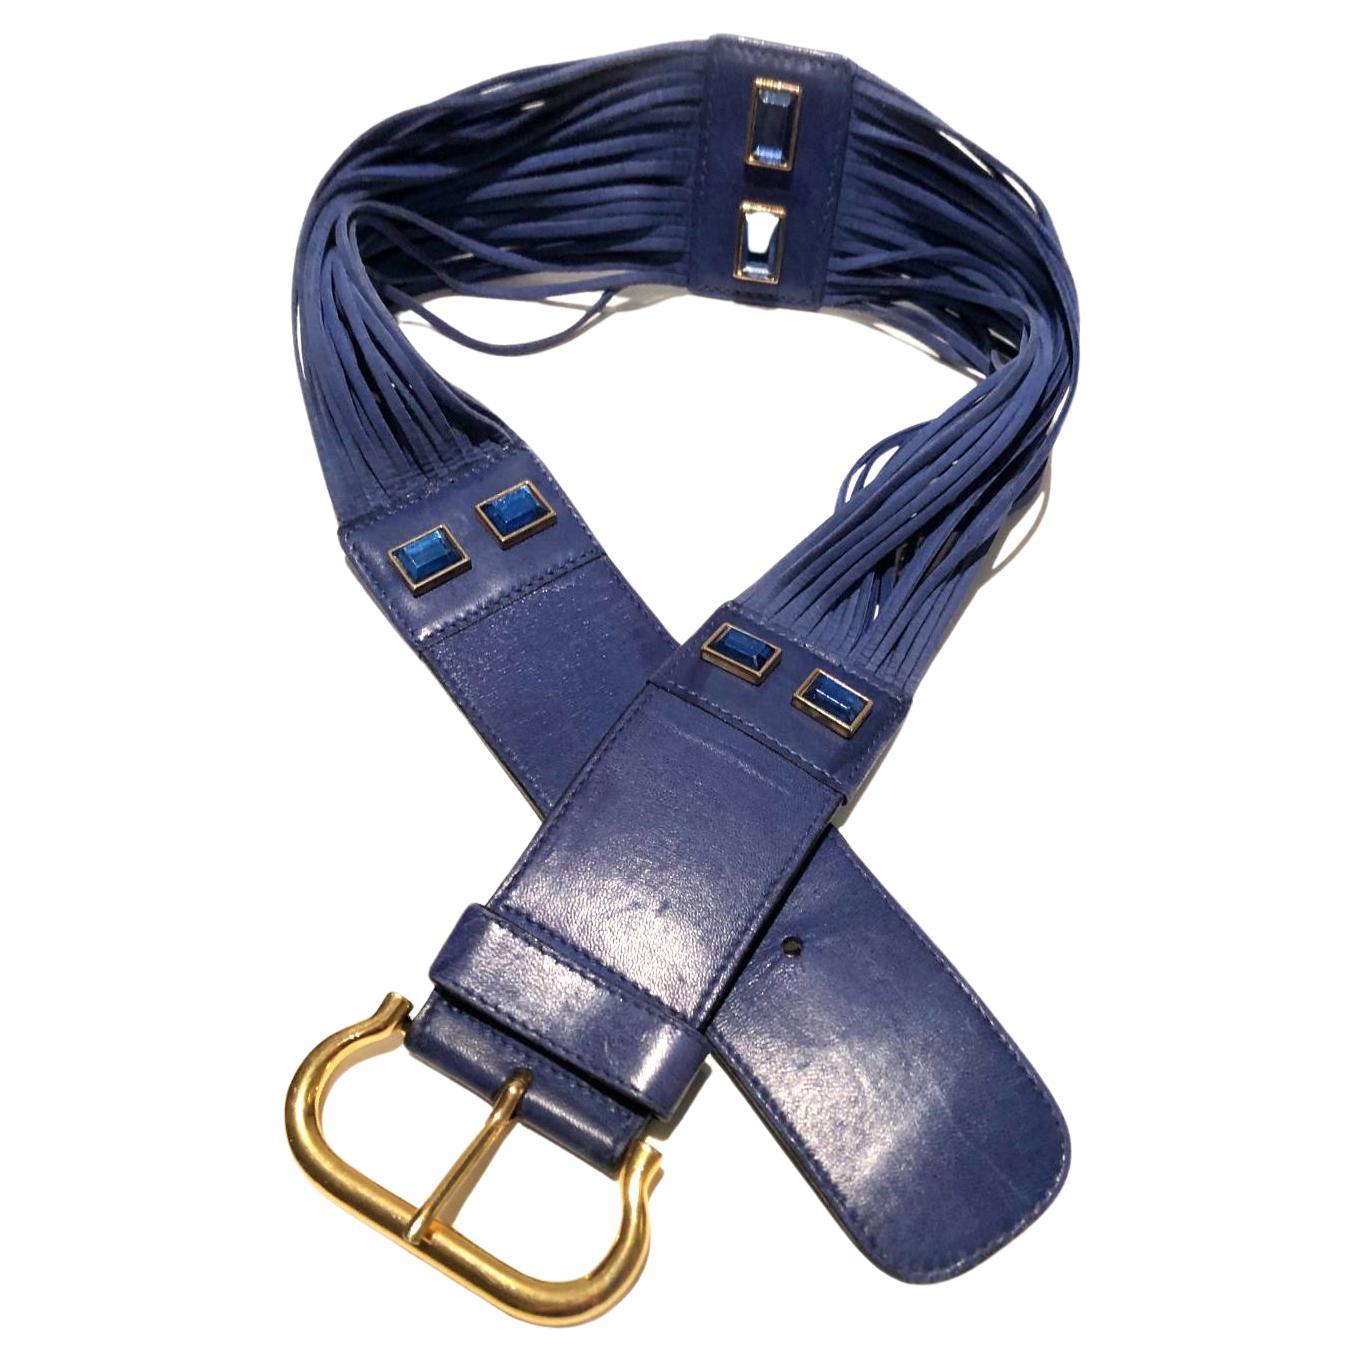 Escada Blue rhinestone suede leather fringe belt, high waisted in excellent vintage condition, gold tone metal ware, Made in Italy 

Measurements:
- Length: 85cm / 33.4in
- Buckle height: 9cm / 3.4in